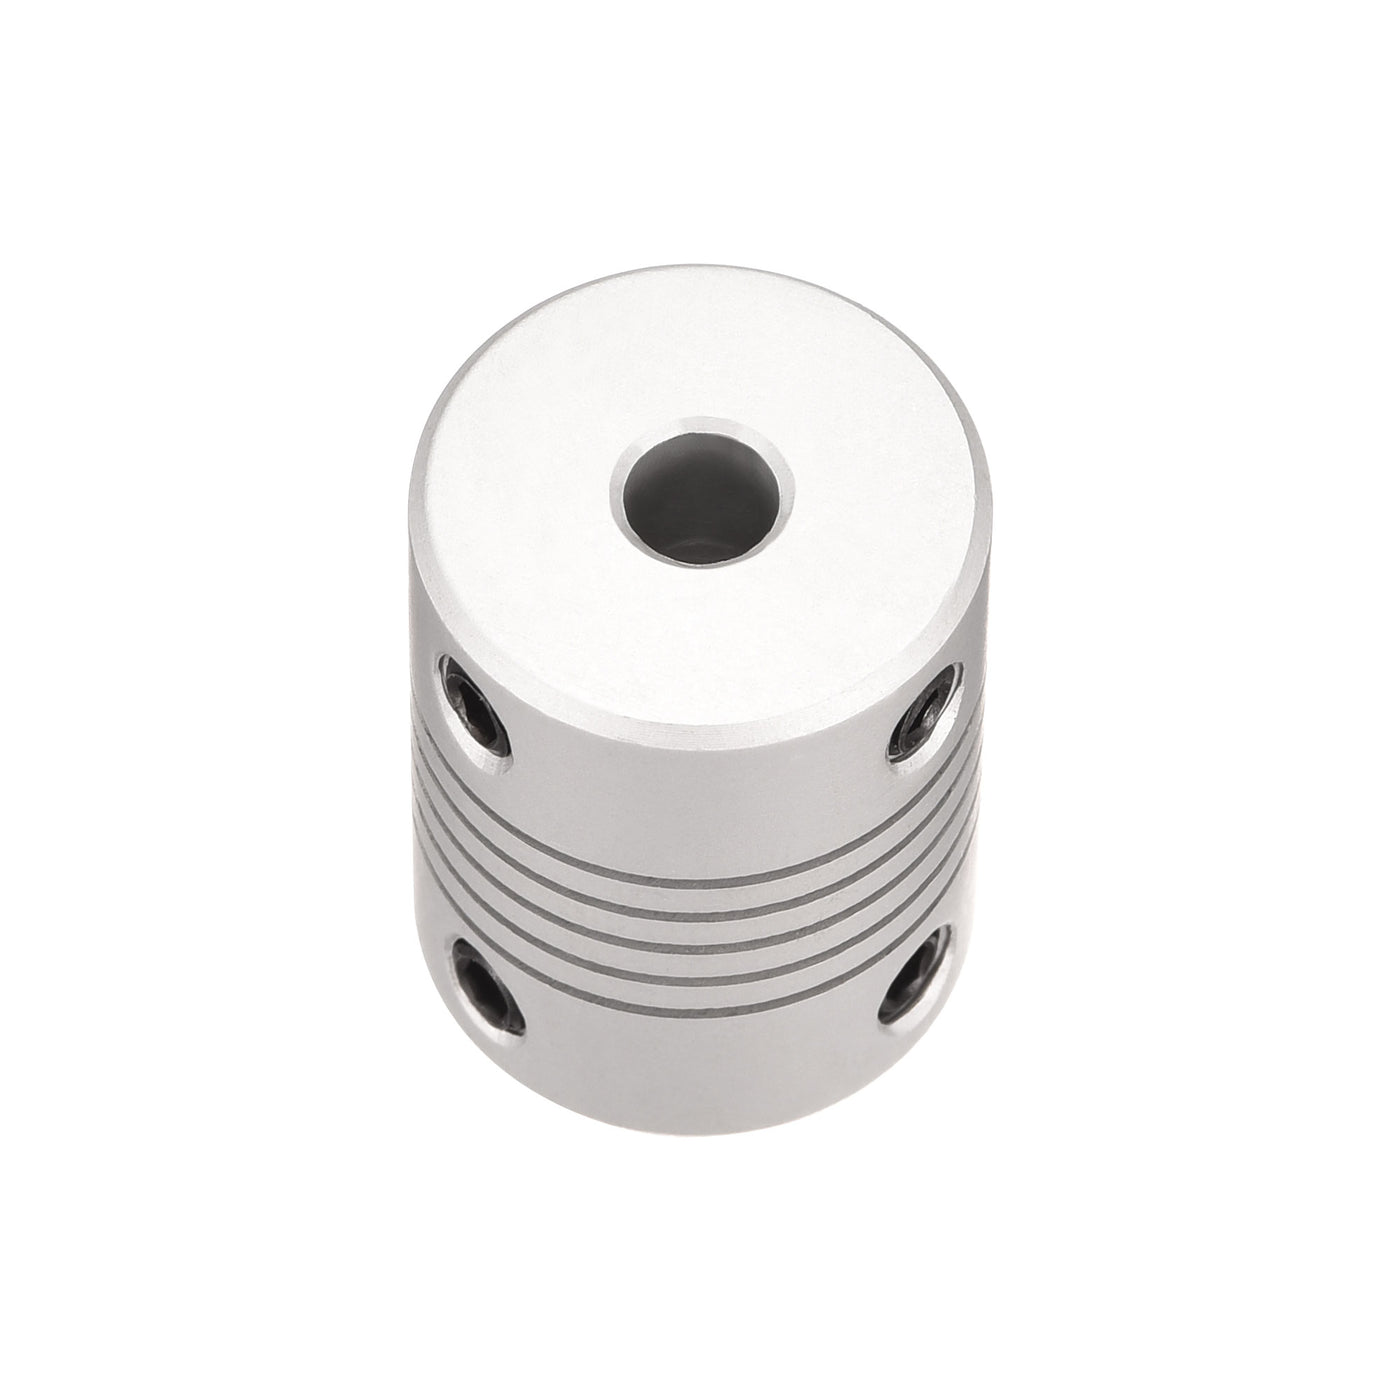 uxcell Uxcell 5mm to 9mm Aluminum Alloy Shaft Coupling Flexible Coupler L25xD19 Silver